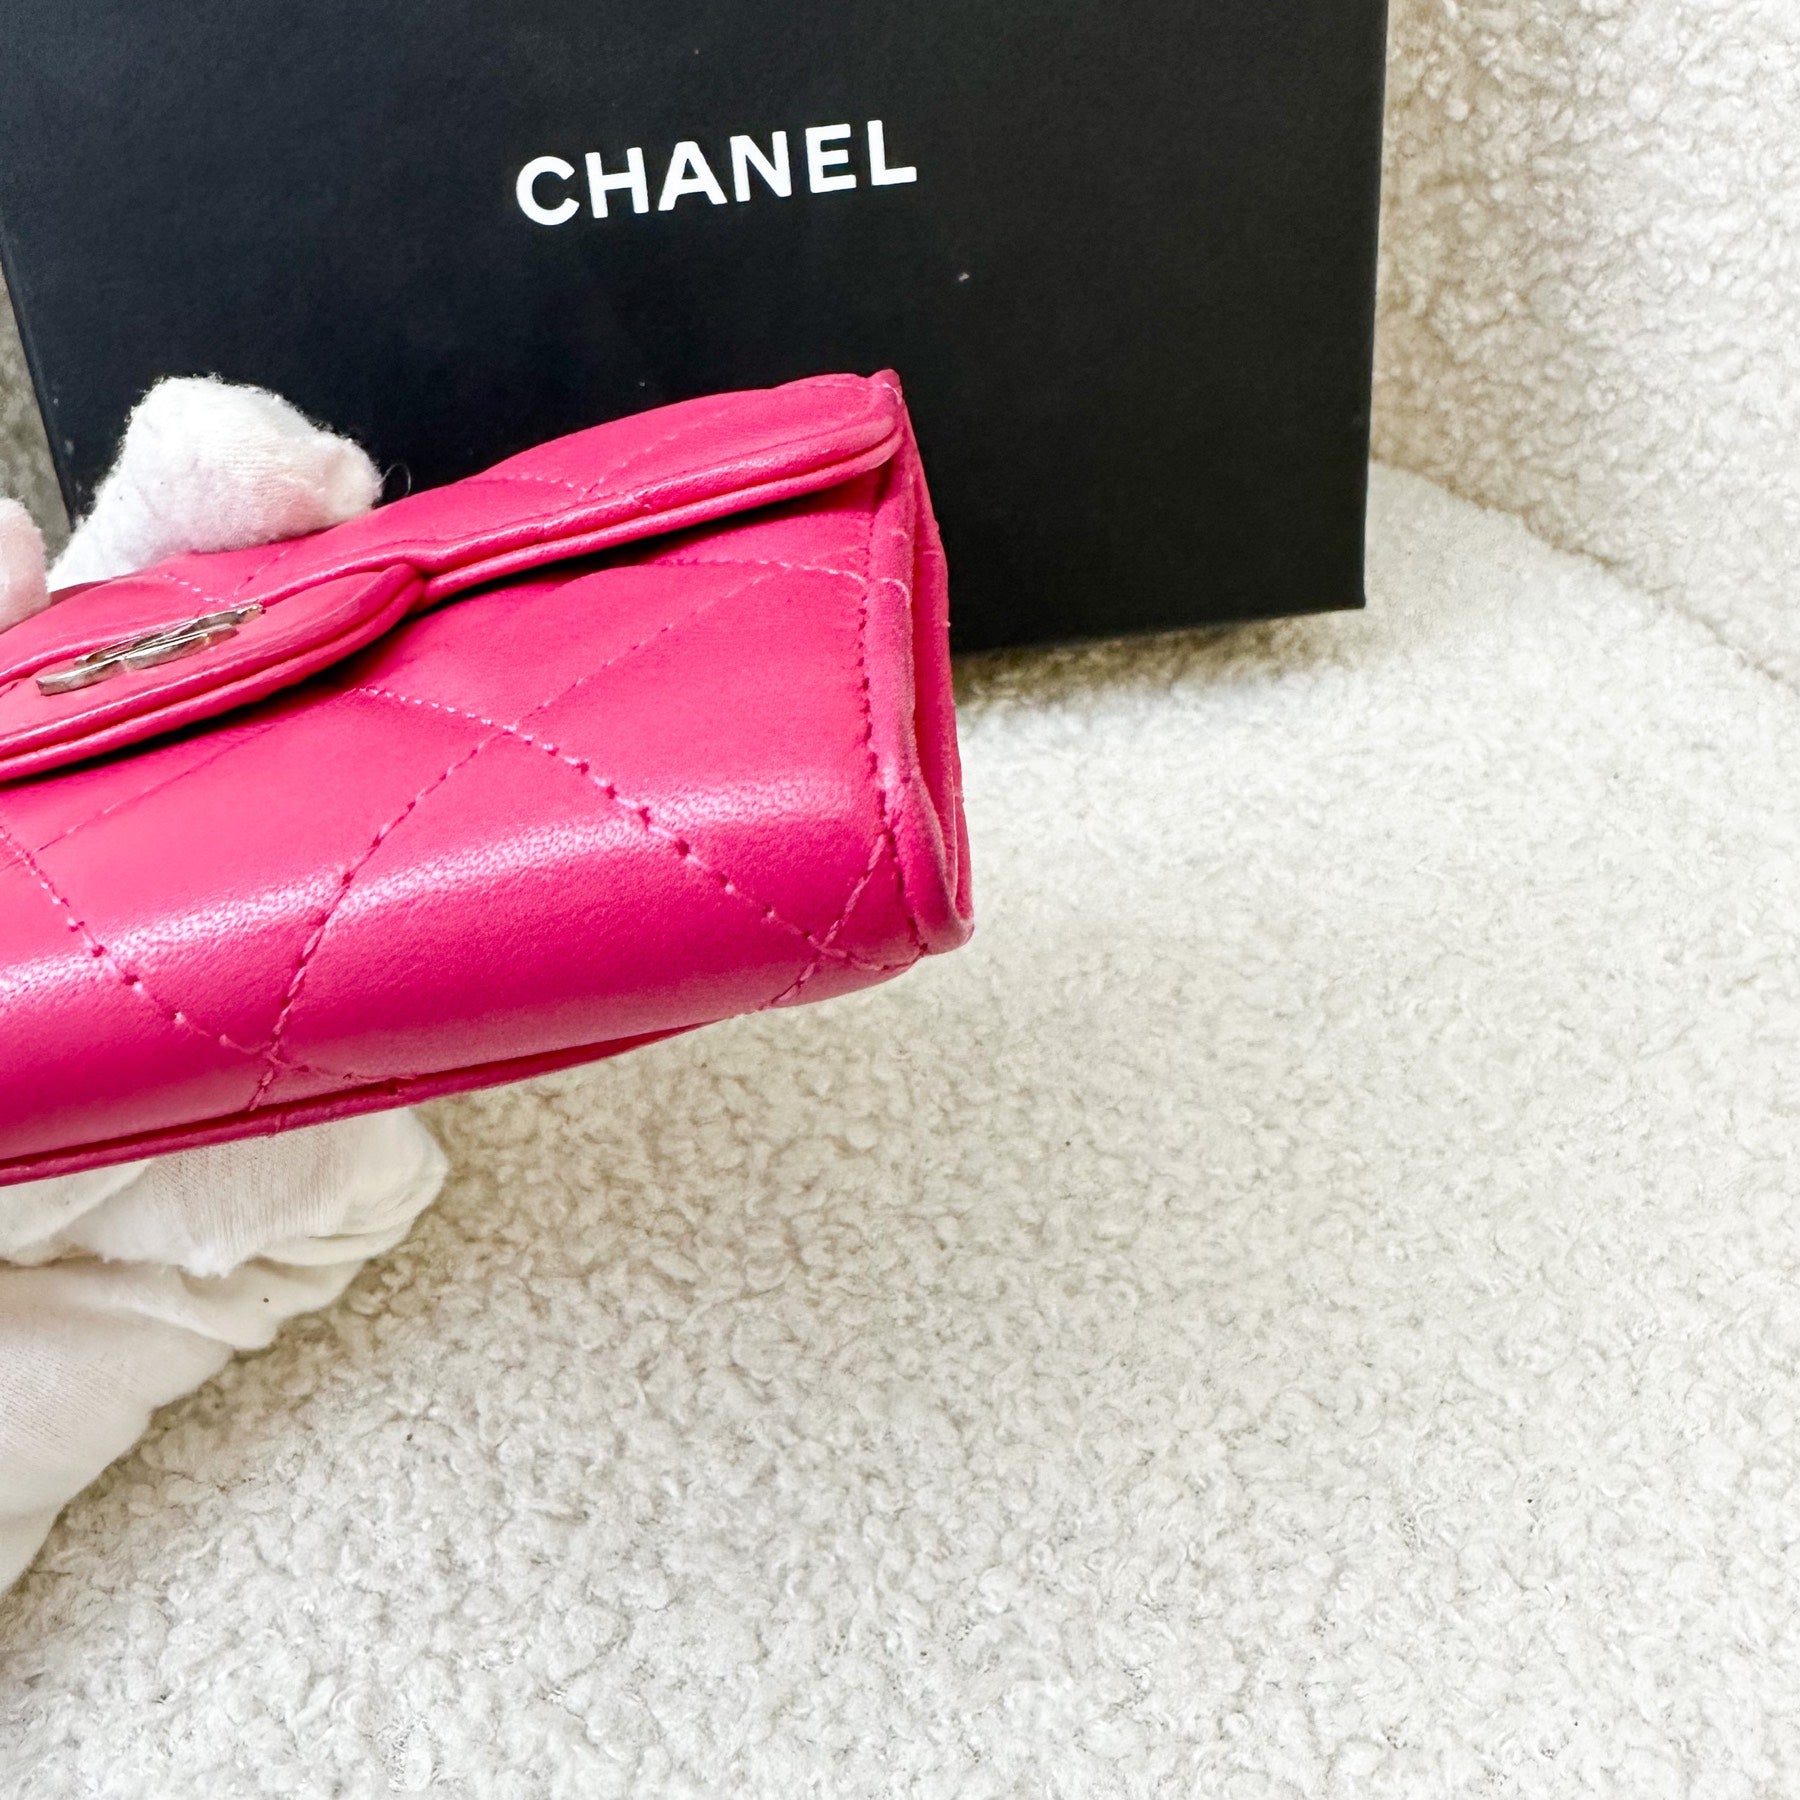 Chanel 2022 ID Card Holder - Pink Wallets, Accessories - CHA810459